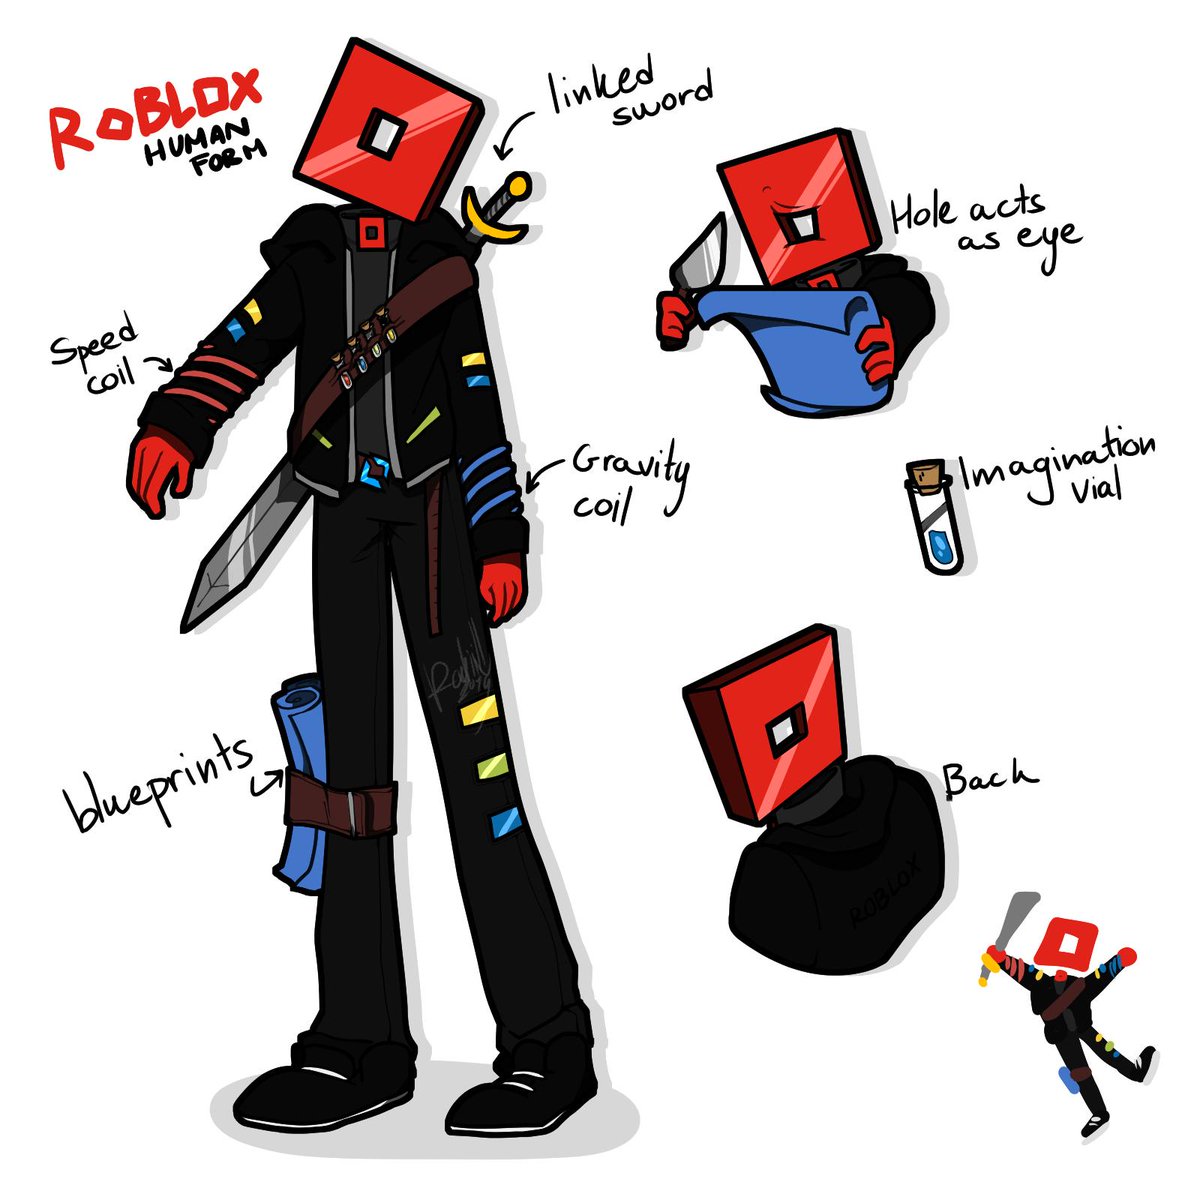 Roblox On Twitter Design An Rthro Avatar Submit Your Concept See Your Art Come To Life The Robloxrthrocontest Is Back Design Your Original Rthro Character To Be Included In - roblox competition 2020